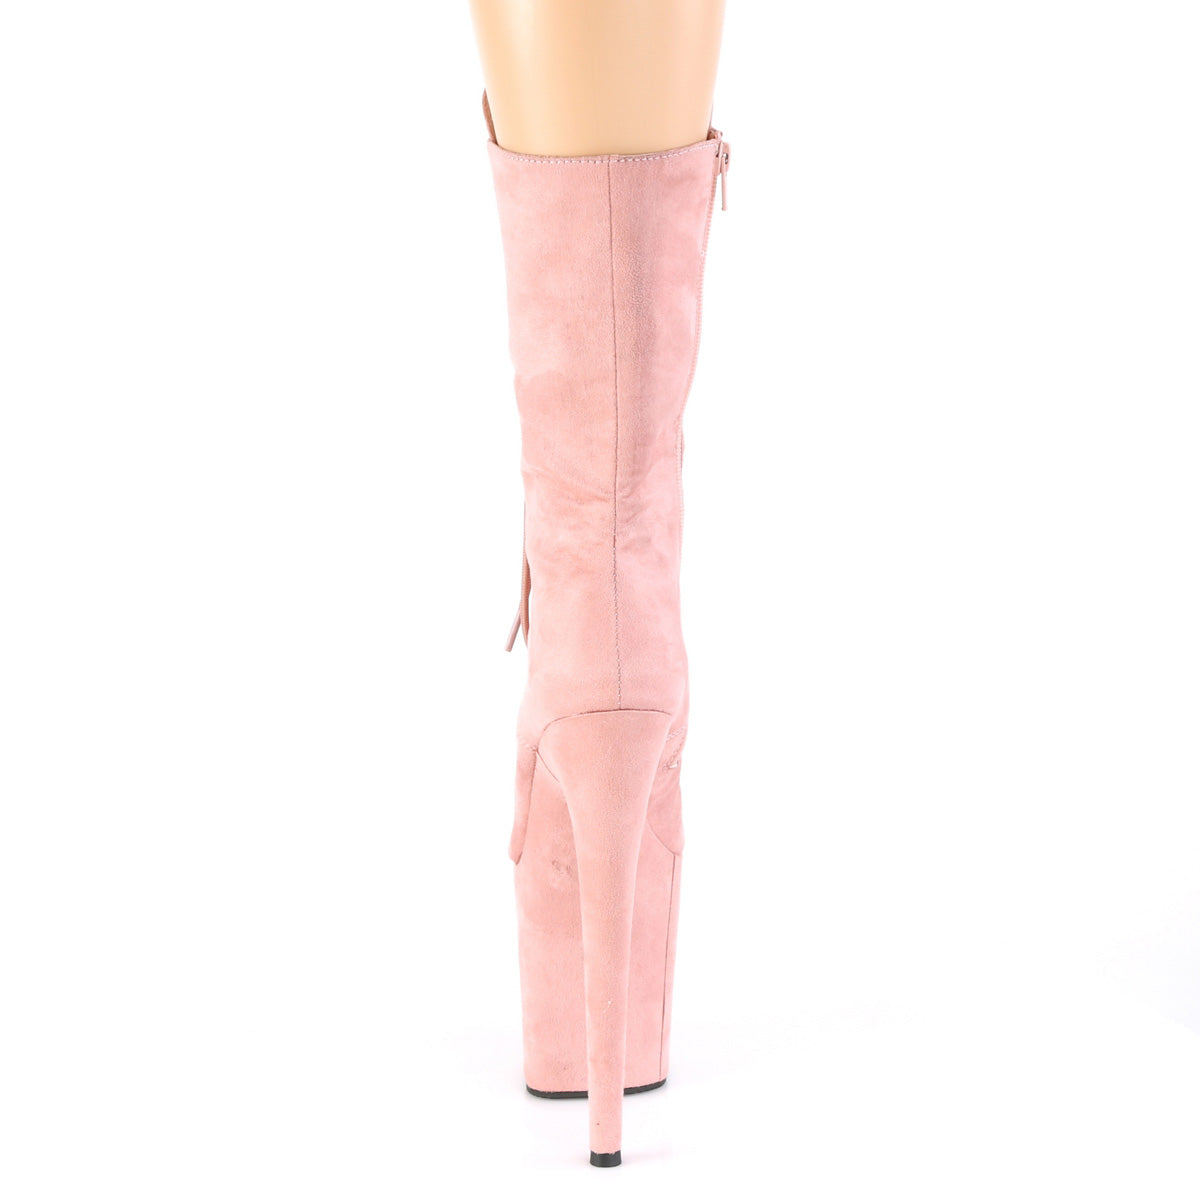 FLAMINGO-1050FS Baby Pink Faux Suede/Baby Pink Faux Suede Mid-Calf Boot Pleaser